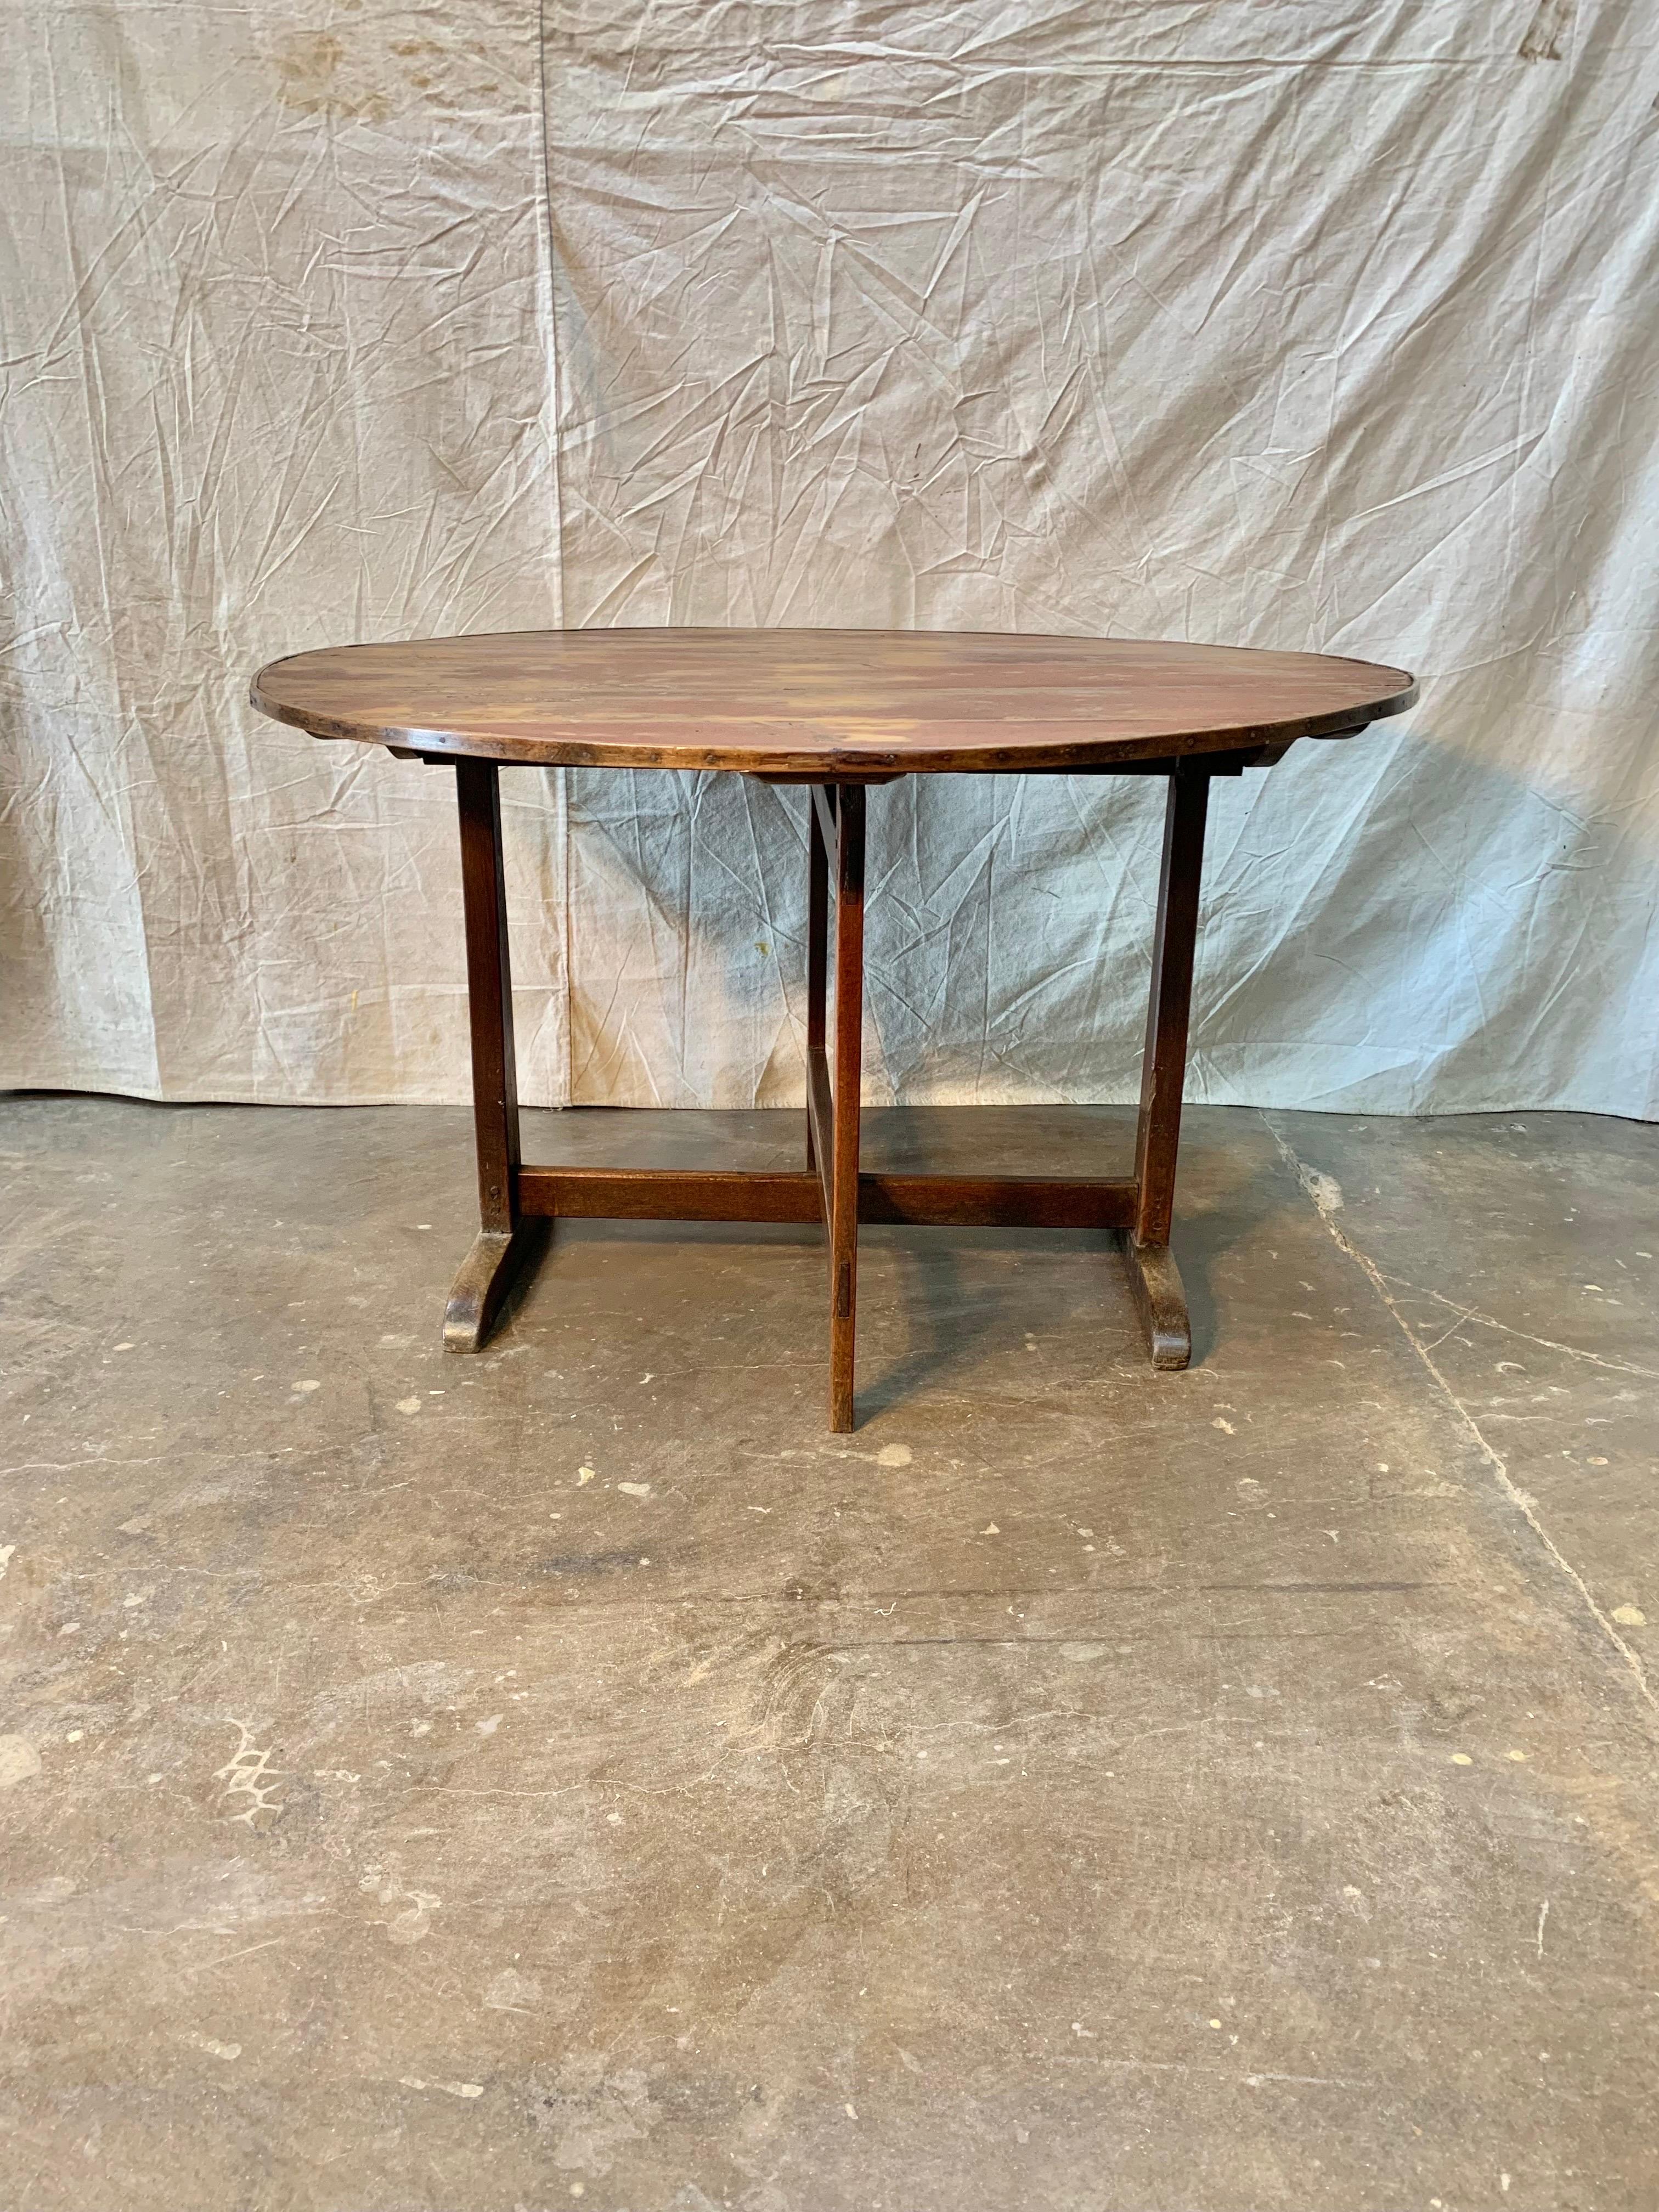 19th Century French wine tasting table, also known as a vendage or vigeron table, which was once used in the vineyards of France for tasting wine or enjoying a meal. This table would be suitable for use as a center table or in a wine cellar. The top